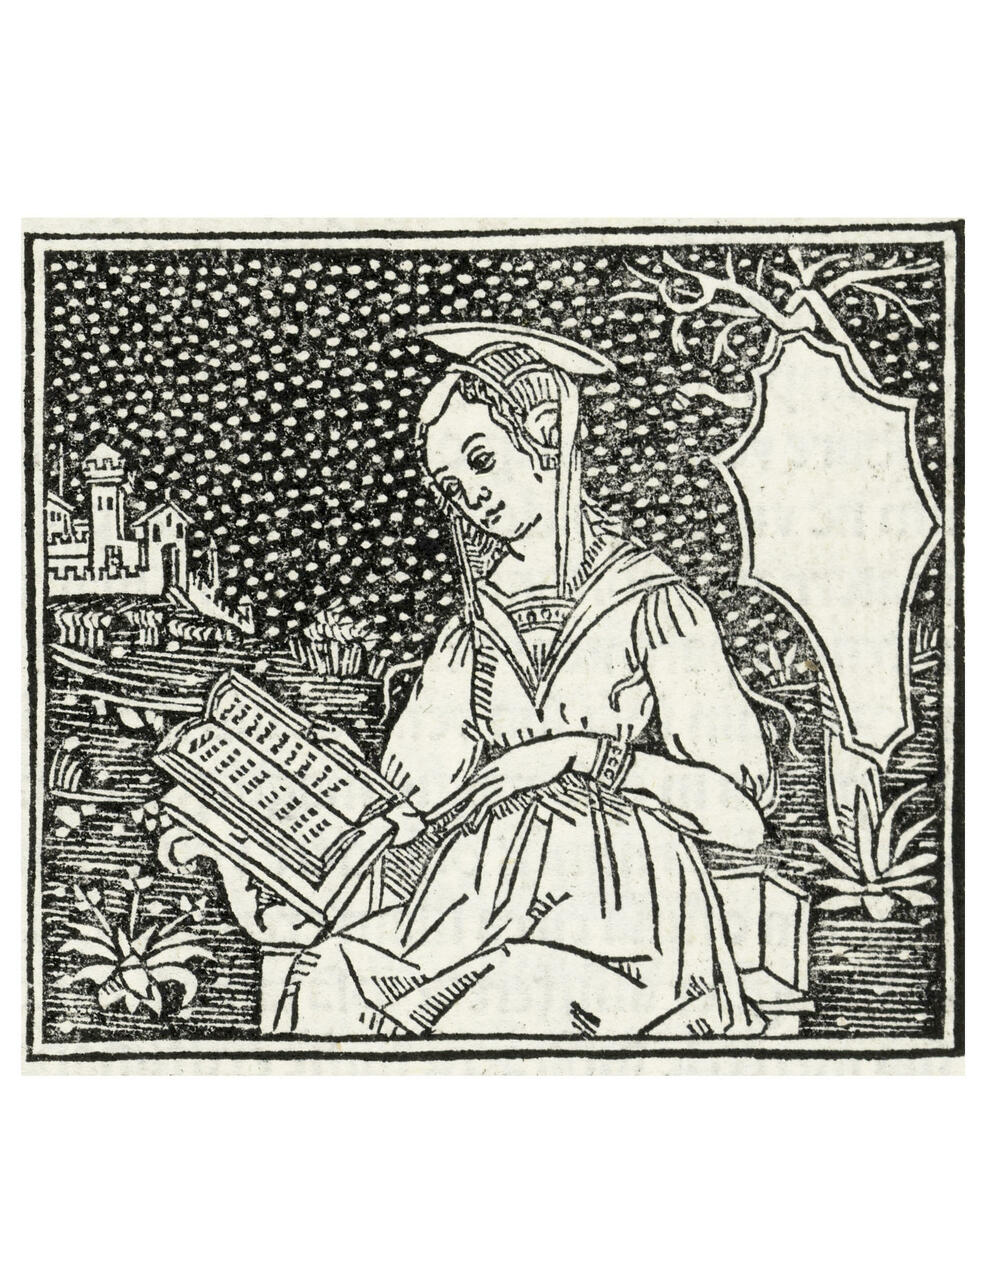 A reader on an old engraving